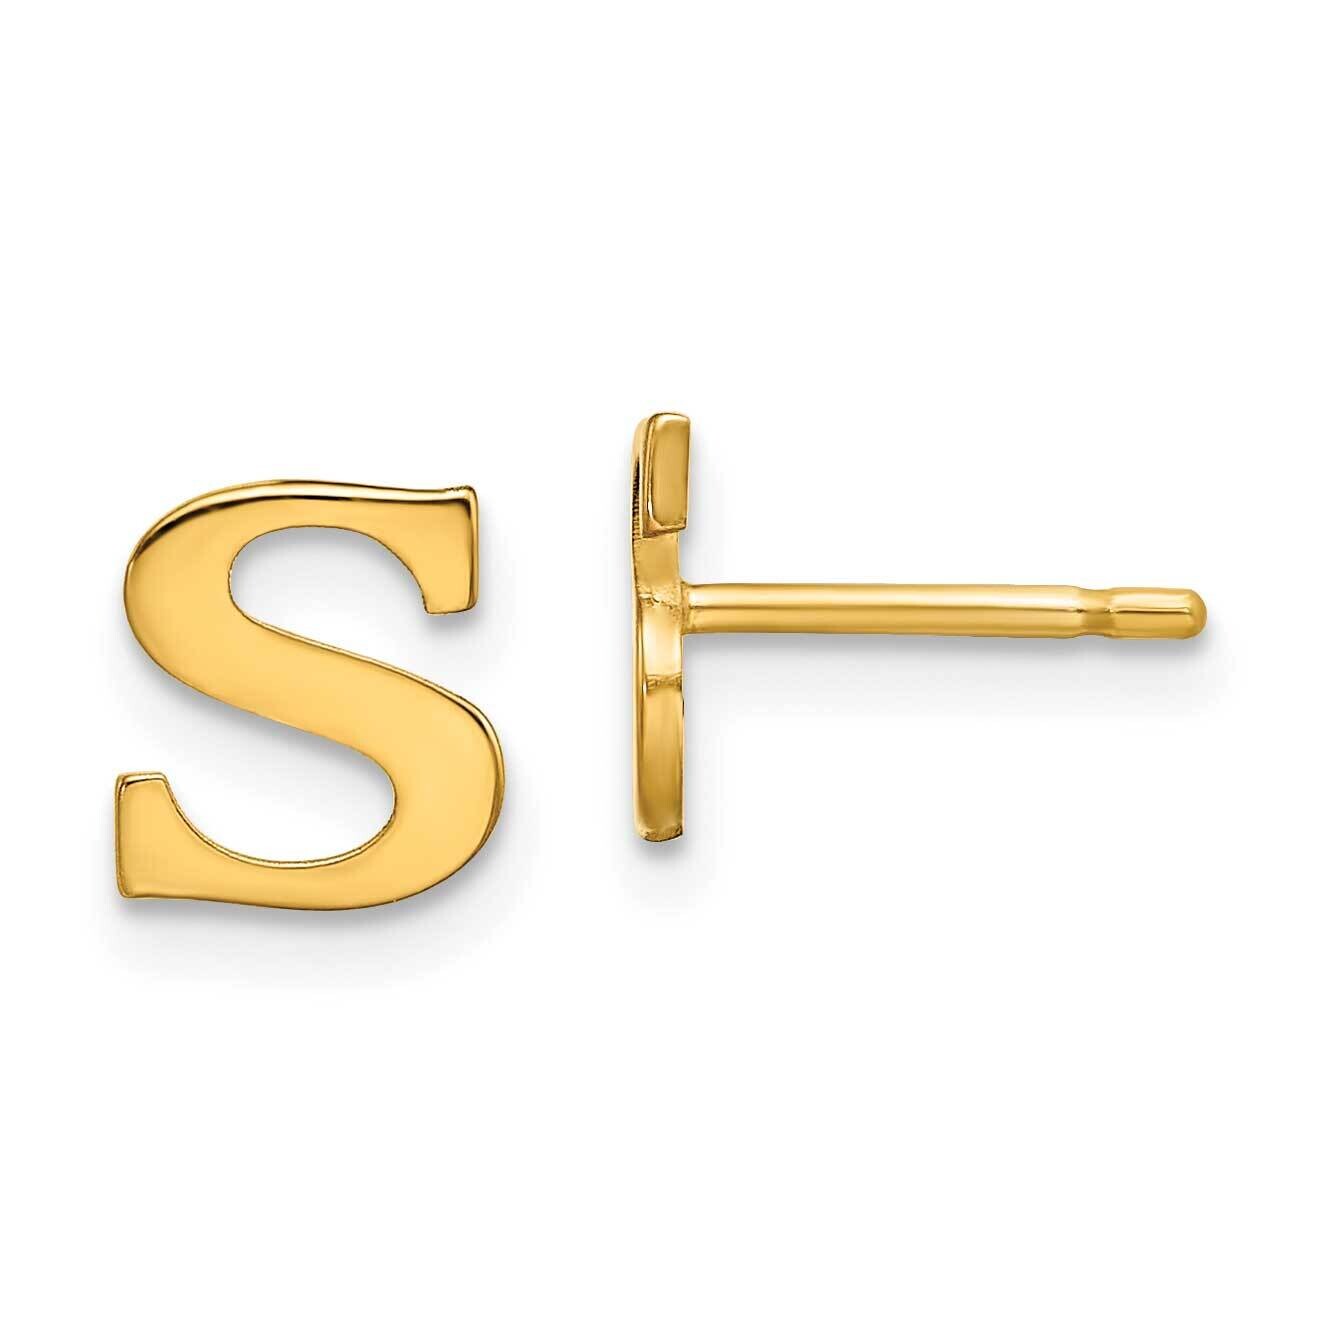 Gold-Plated Letter S Initial Post Earrings Sterling Silver XNE46GP/S